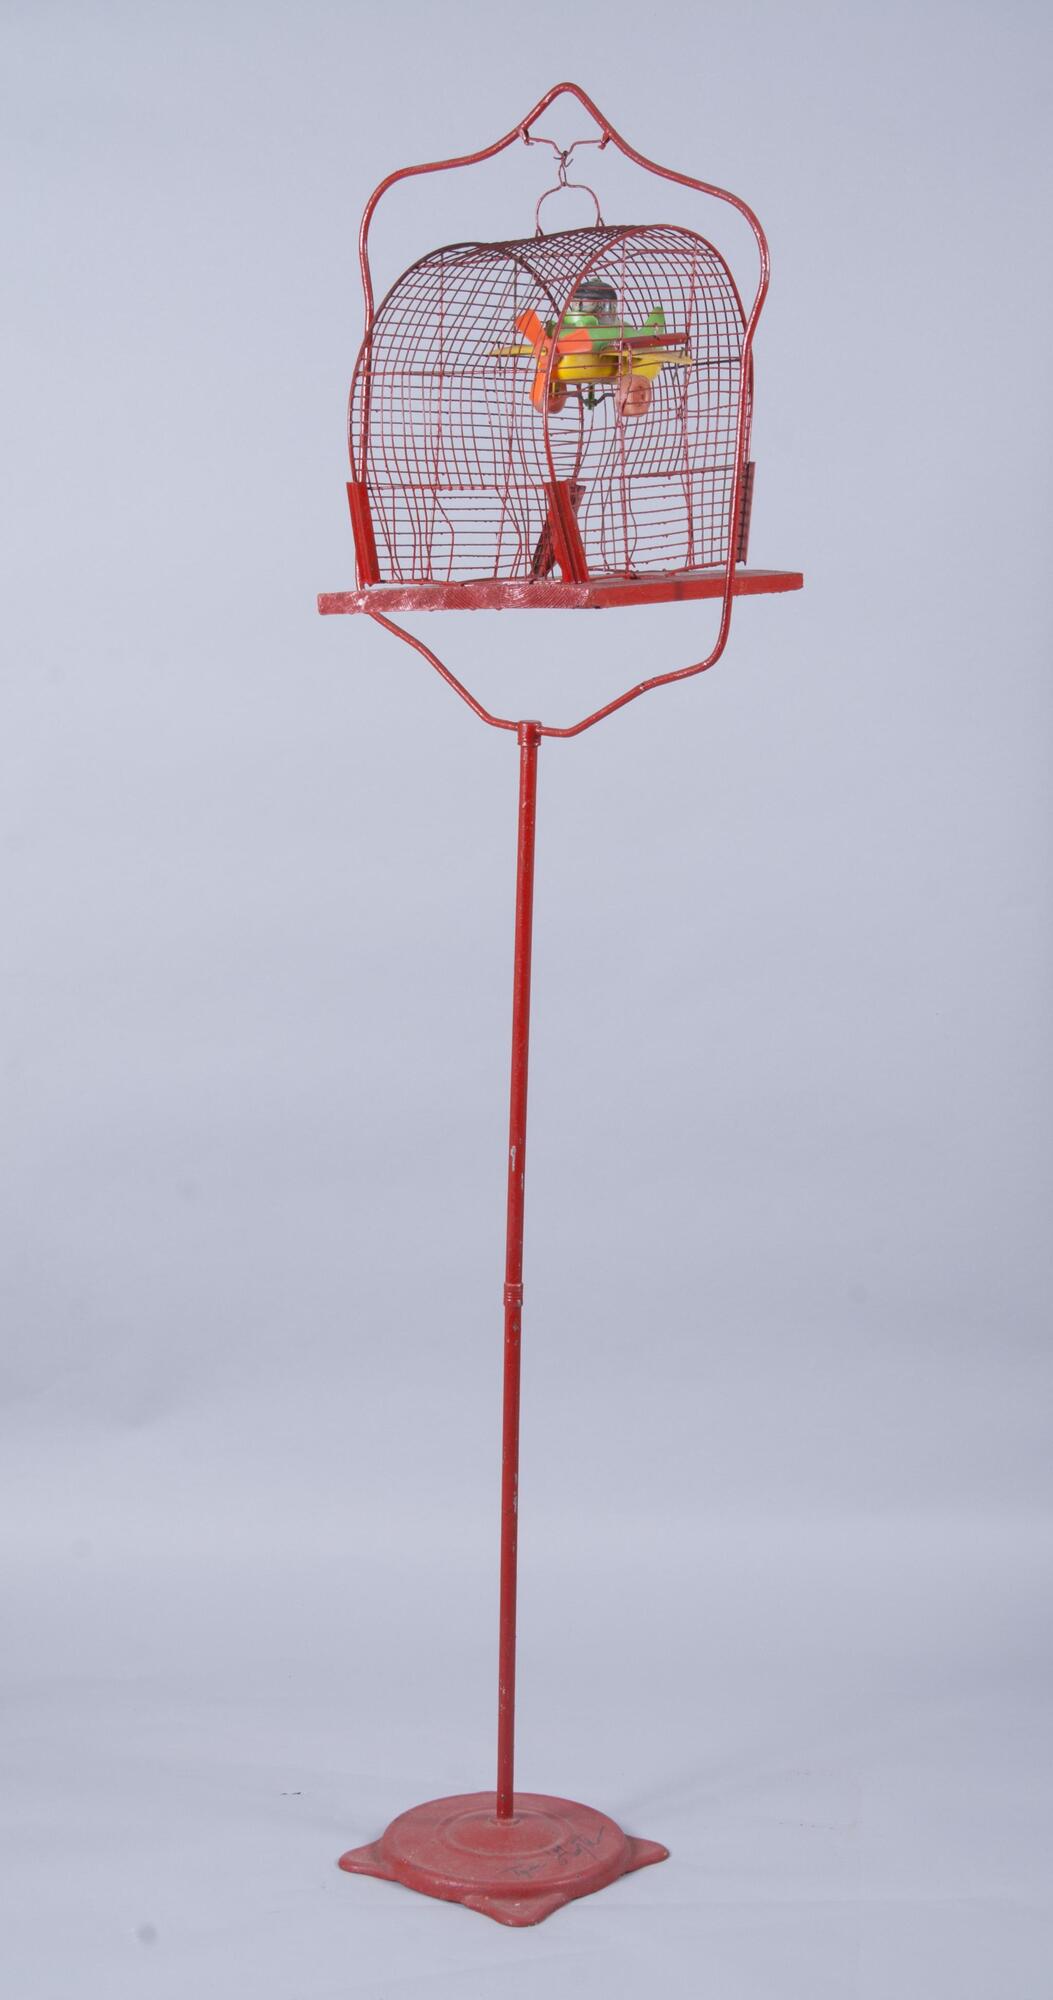 This sculpture consists of a red bird cage stand with a half-circle red cage on top. Inside the cage, there is a plastic green, yellow and red airplane toy hanging from the top. There is a white and black figure inside the plane. The work is signed by the artist in black paint at the base: "Tyree Guyton".